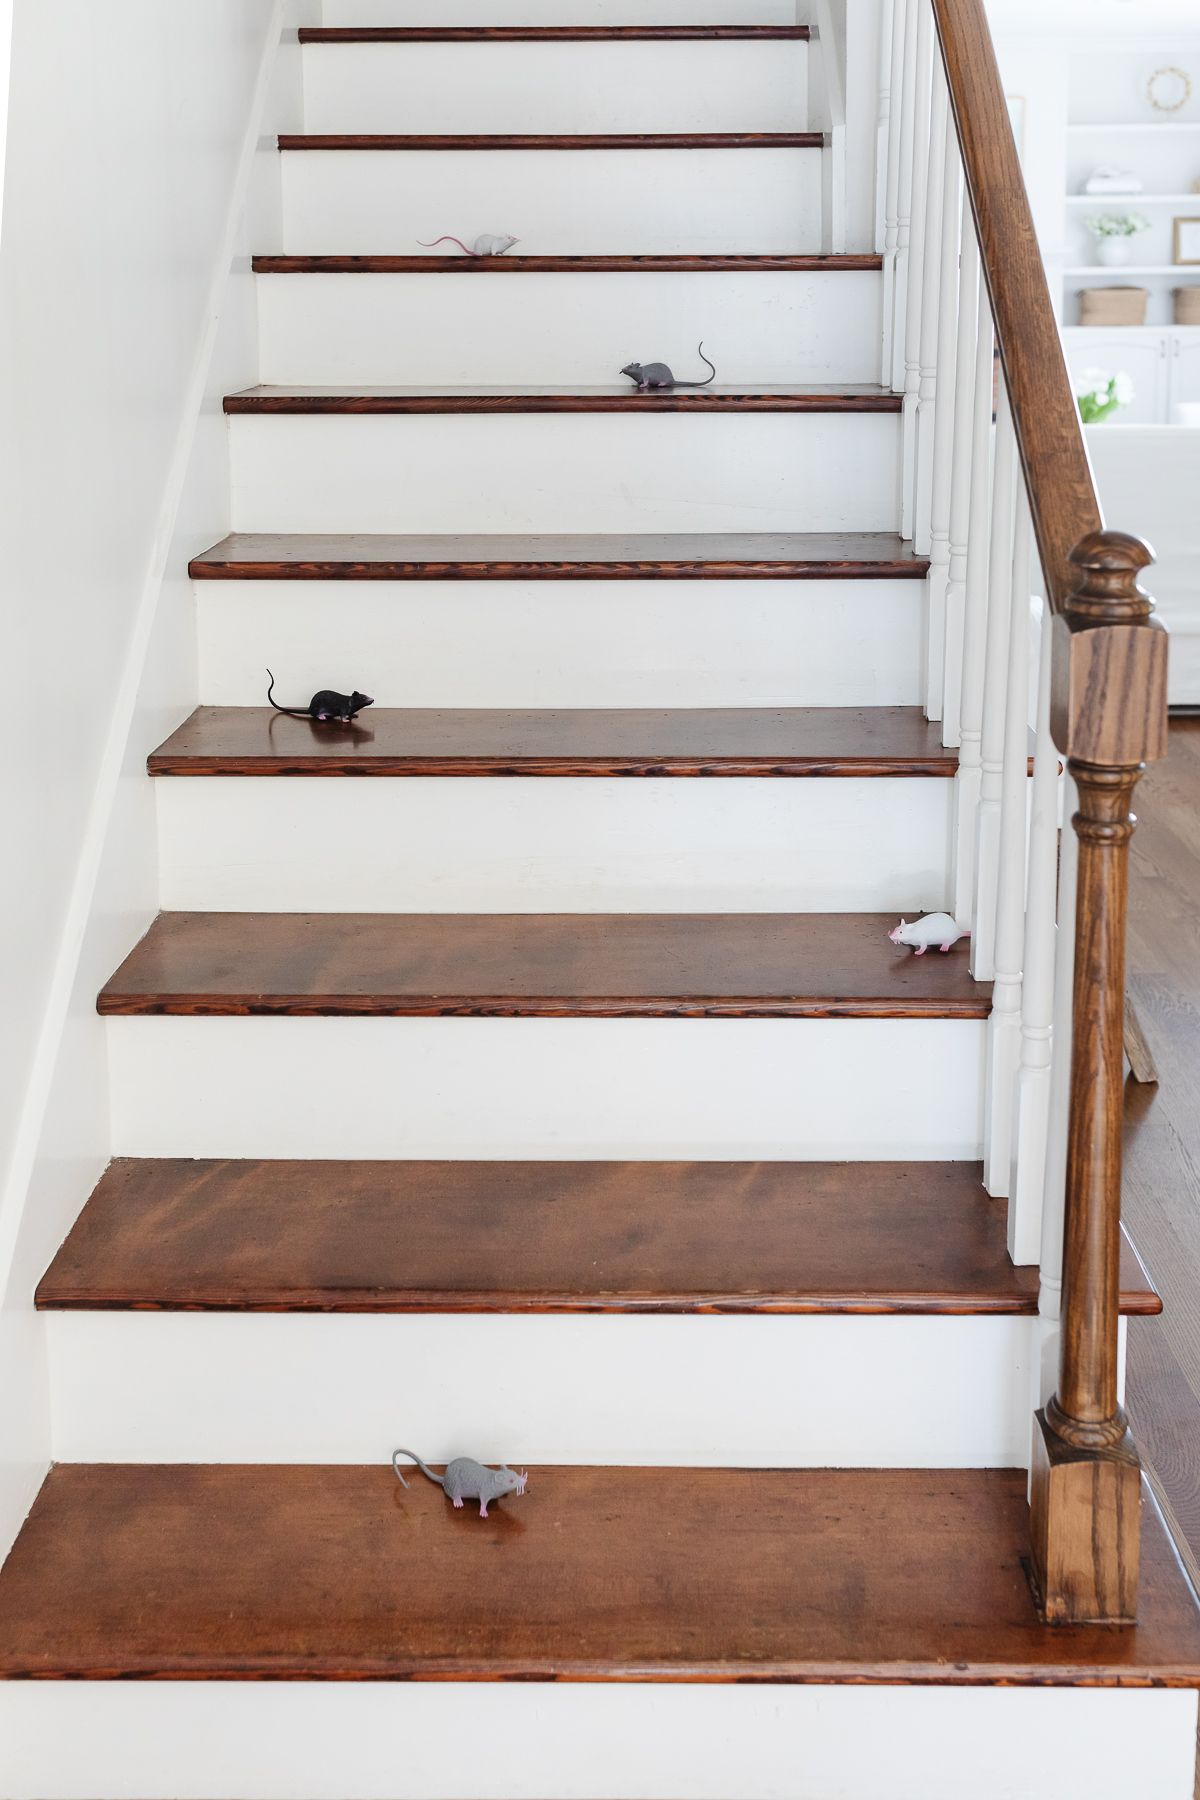 Wood and white stairs, decorated with Amazon Halloween mice